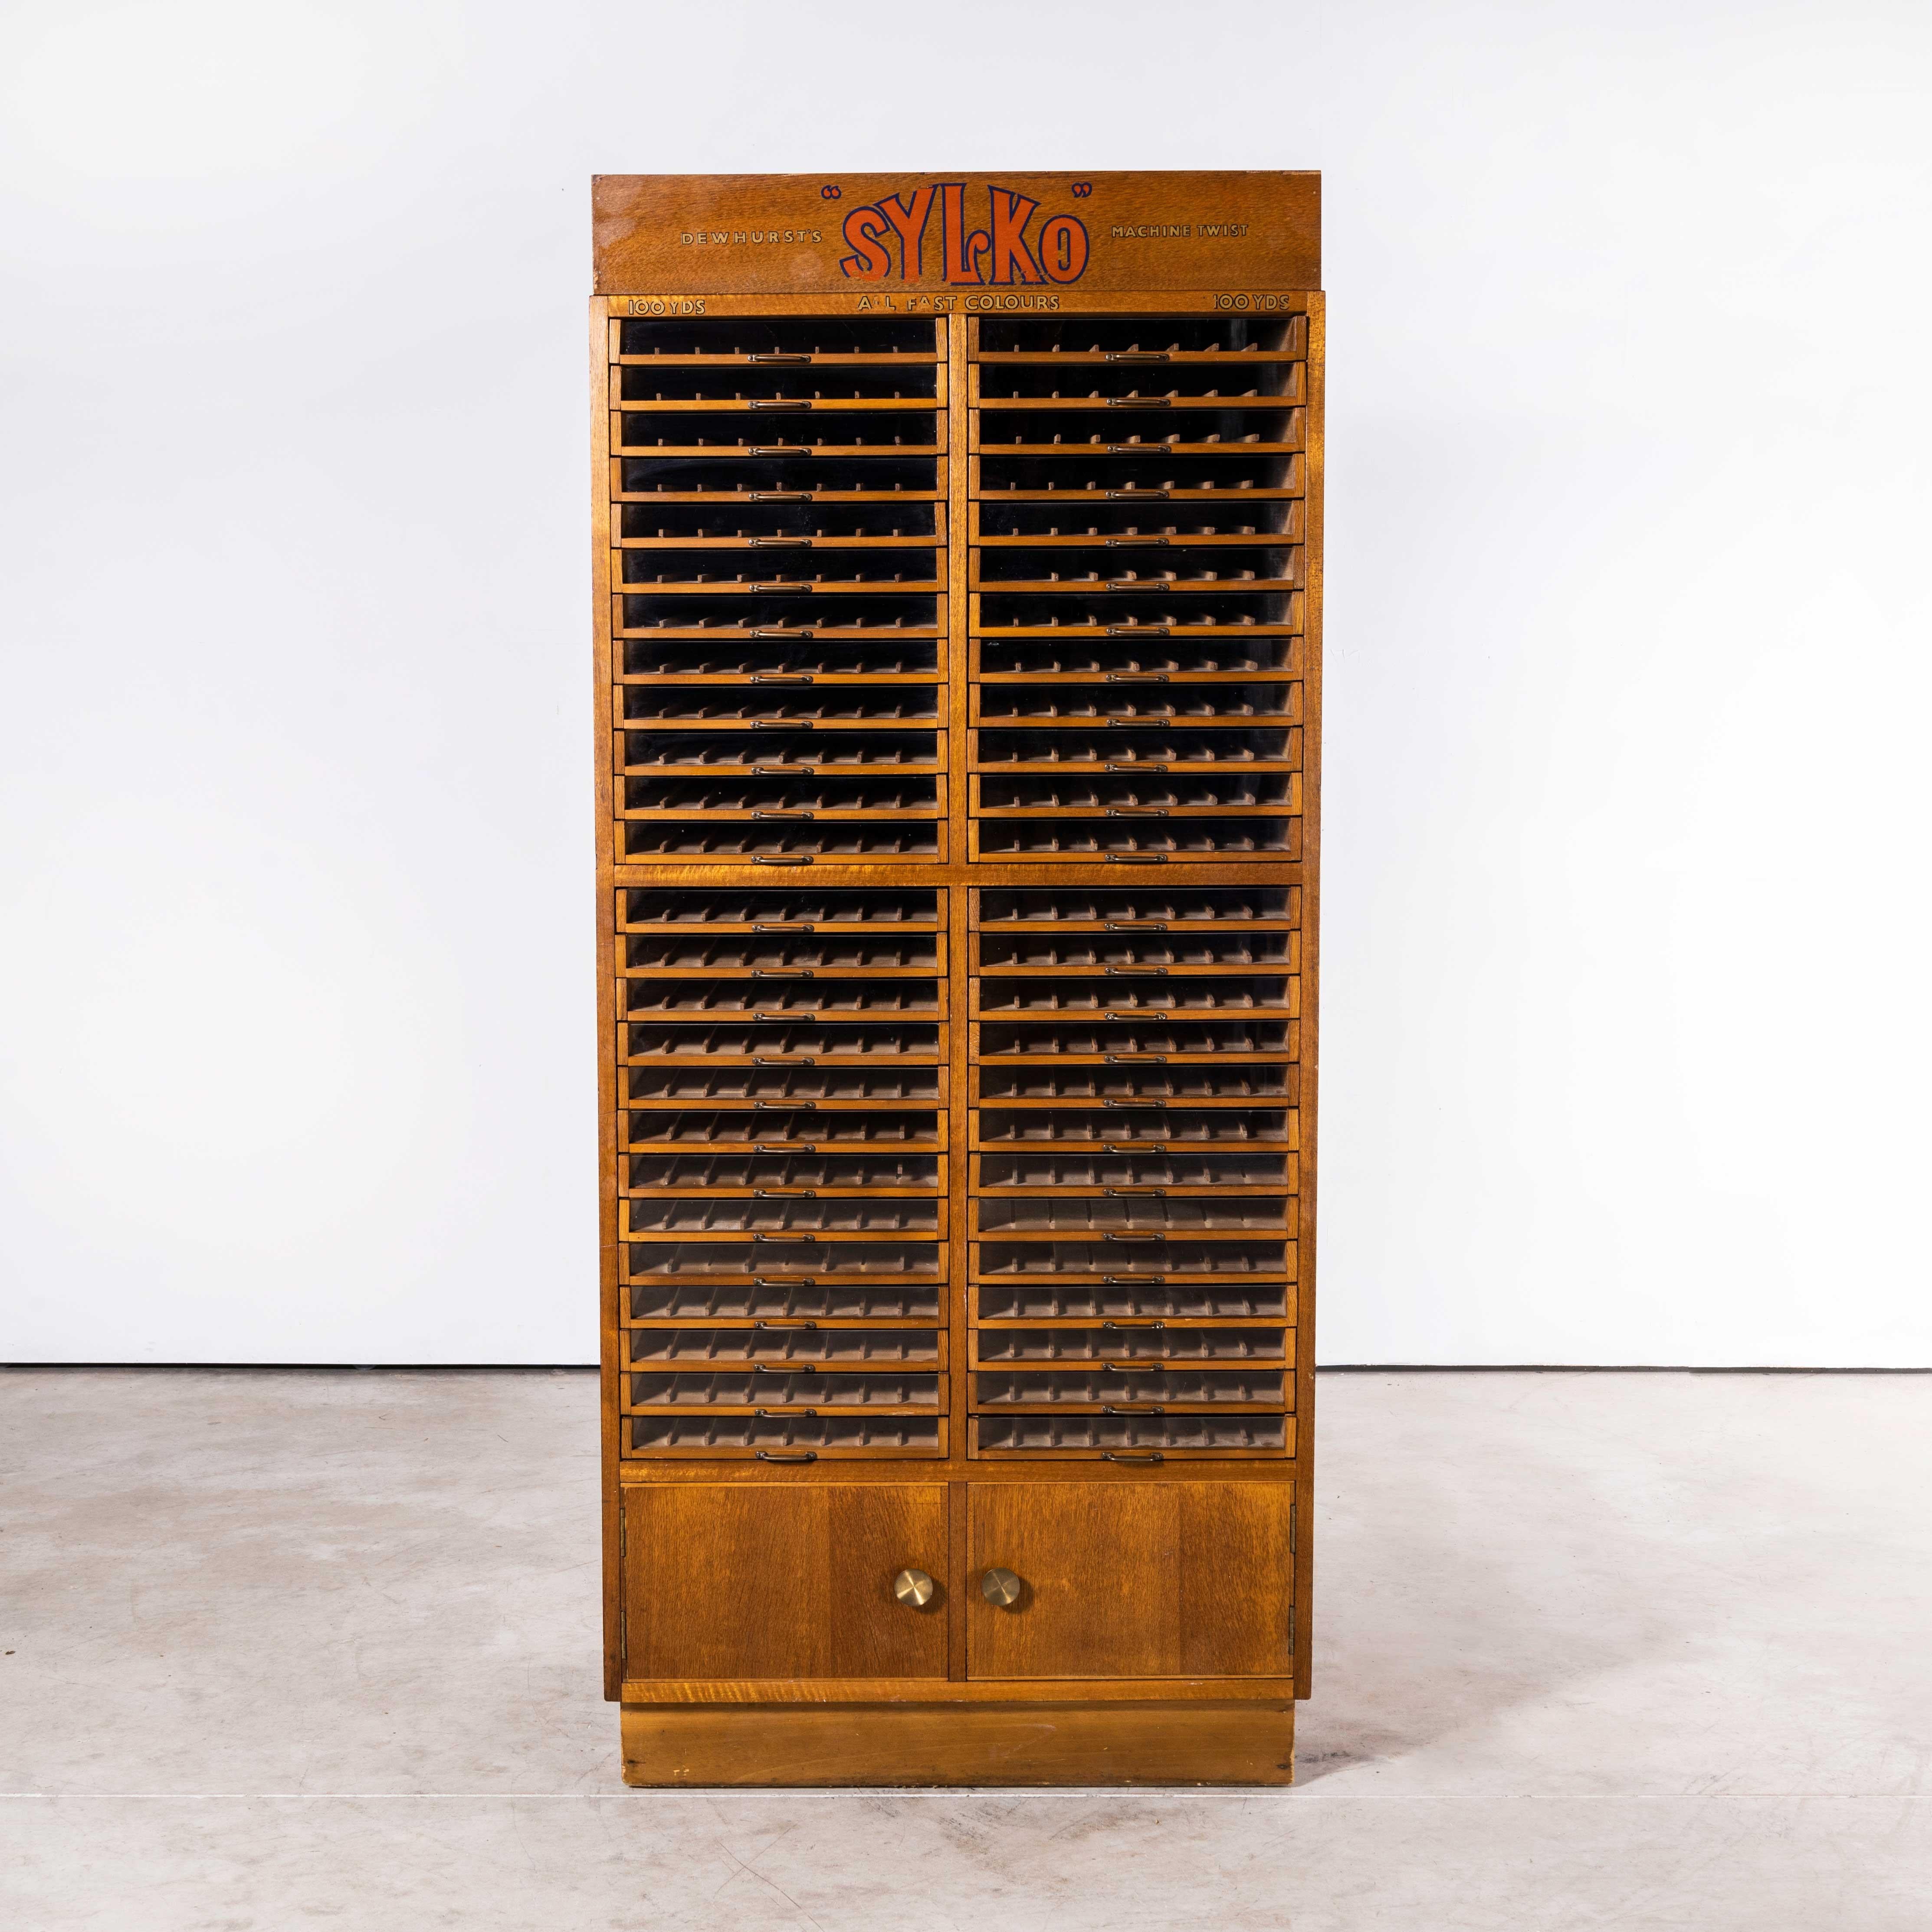 1950’s Glass Fronted Sylko Cotton Haberdashery Storage Unit – Fifty Drawers
1950’s Glass Fronted Sylko Cotton Haberdashery Storage Unit – Fifty Drawers. We recently salvaged a whole collection of original haberdashery shop cabinets from the original